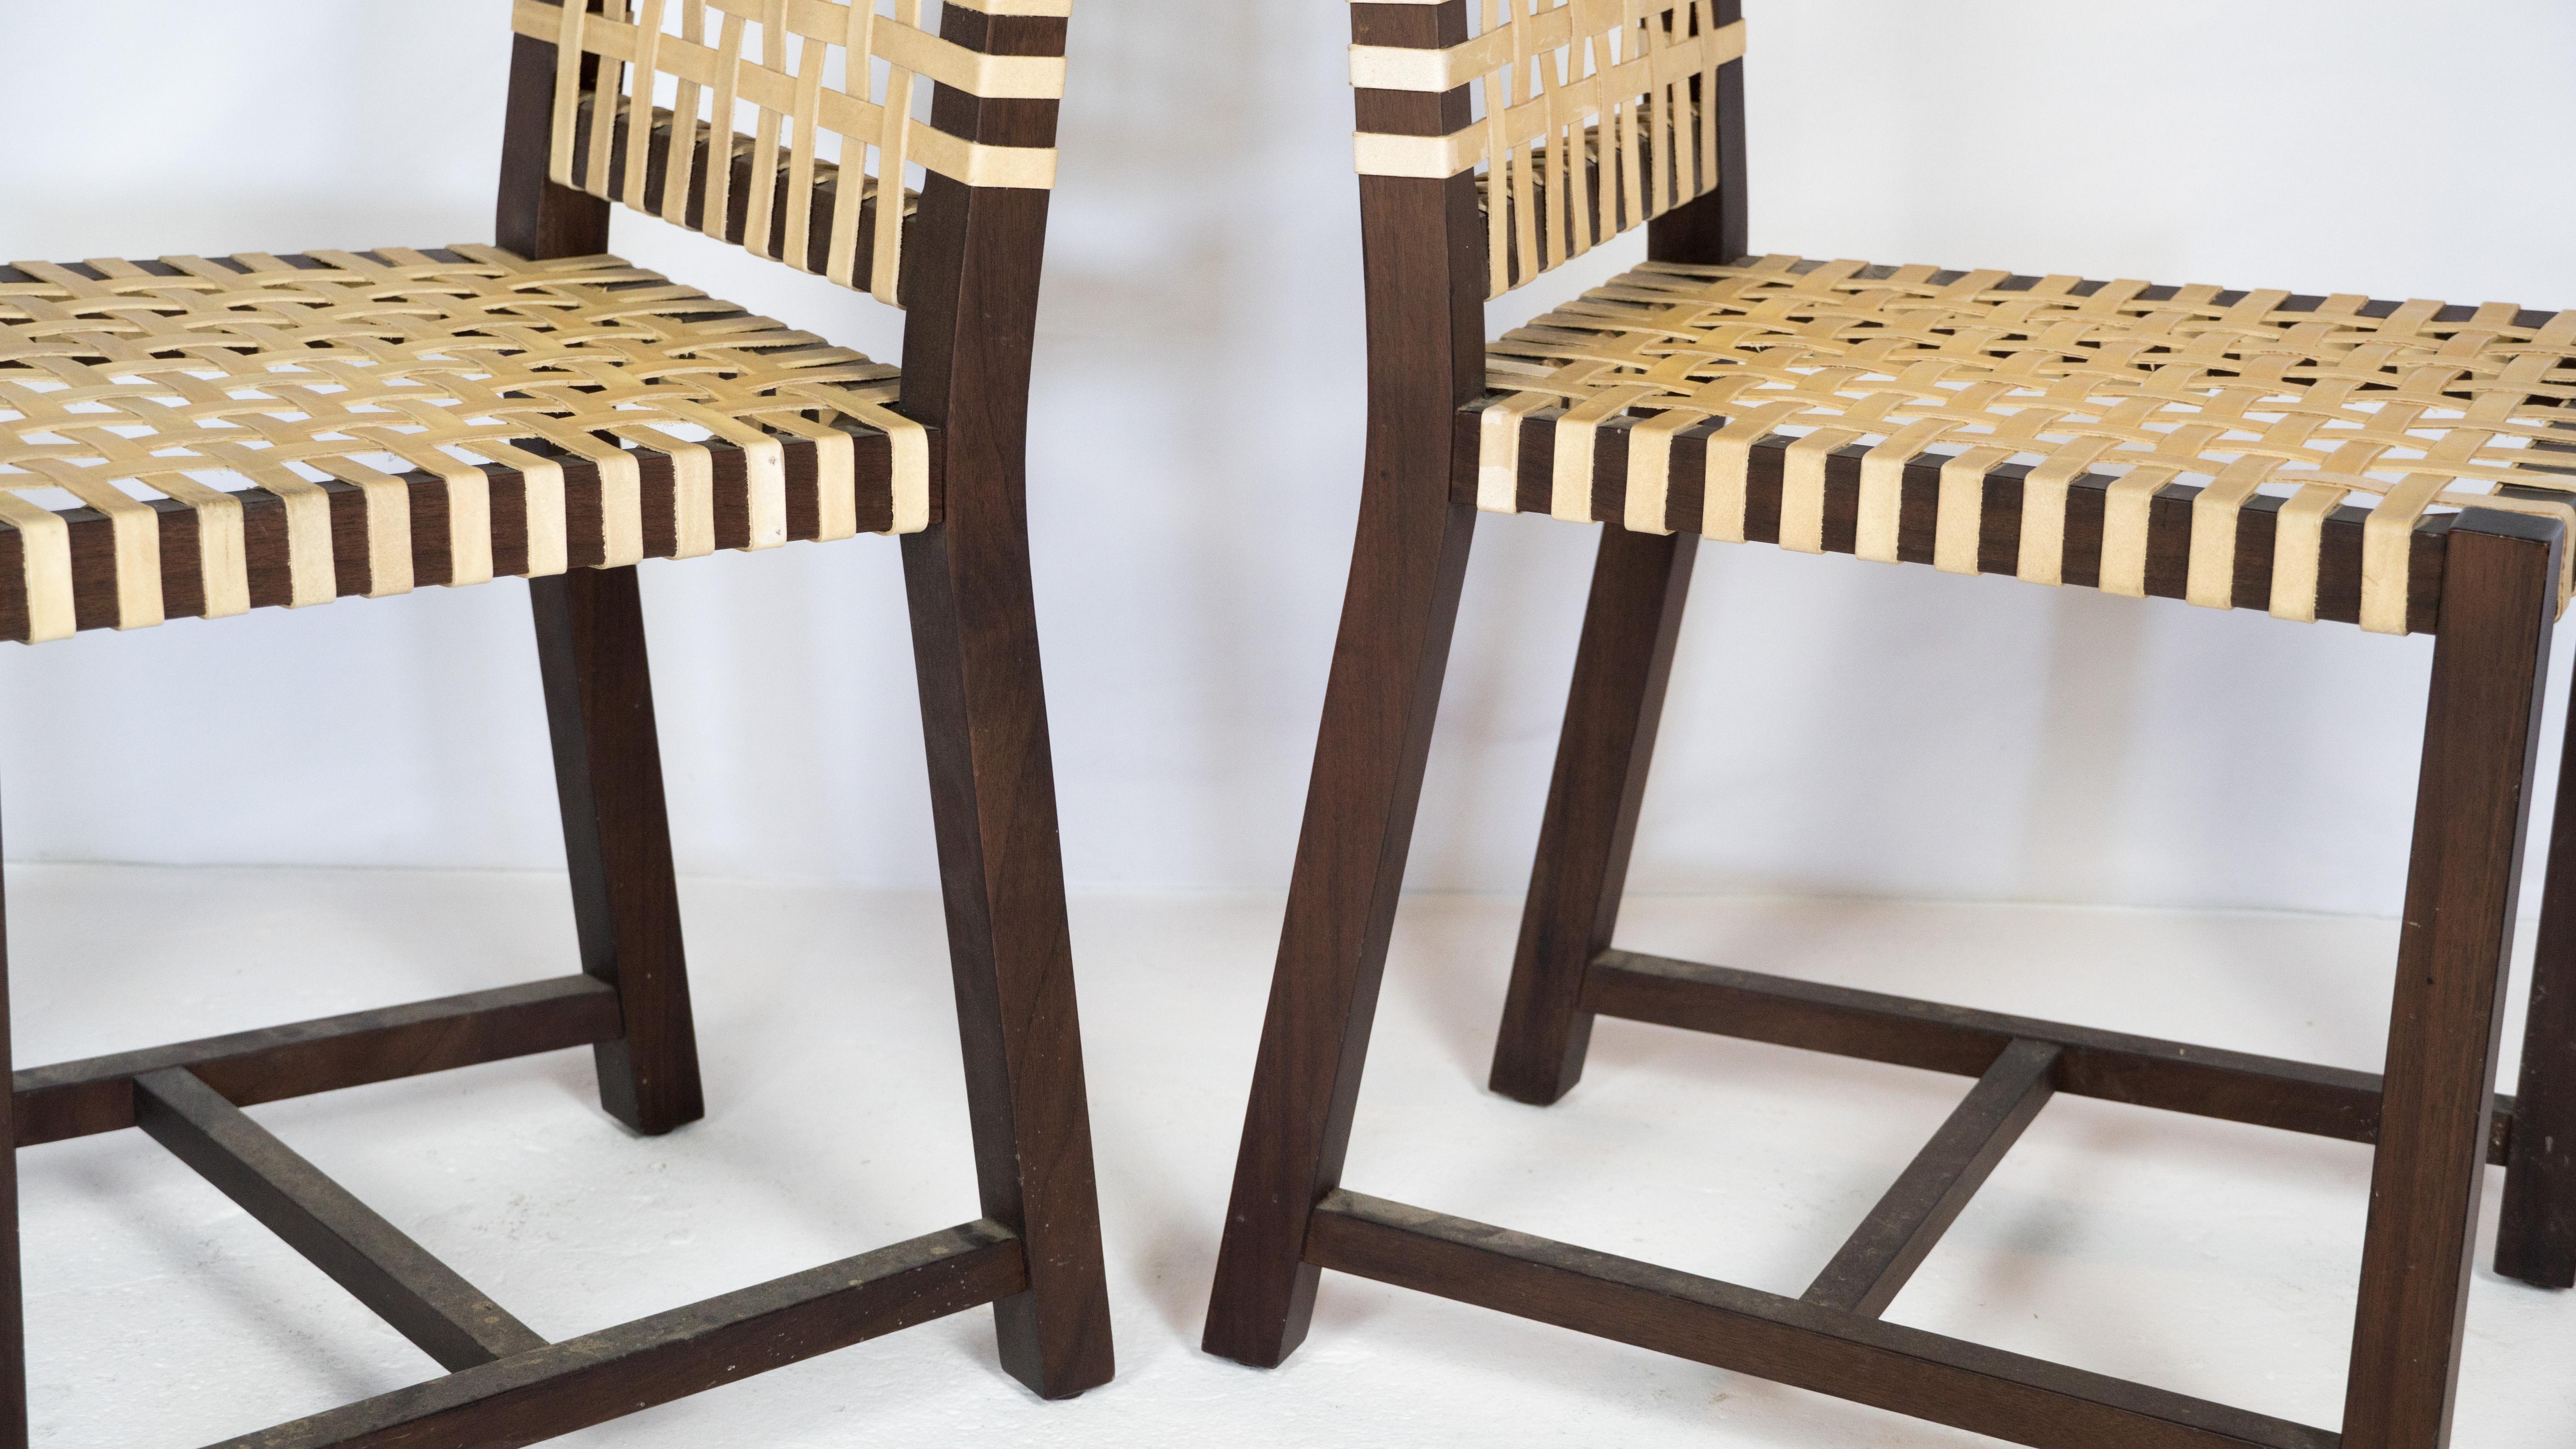 1980s Italian Architectural Otto 121' High Back Chairs by Paola Navone for Gerva For Sale 8